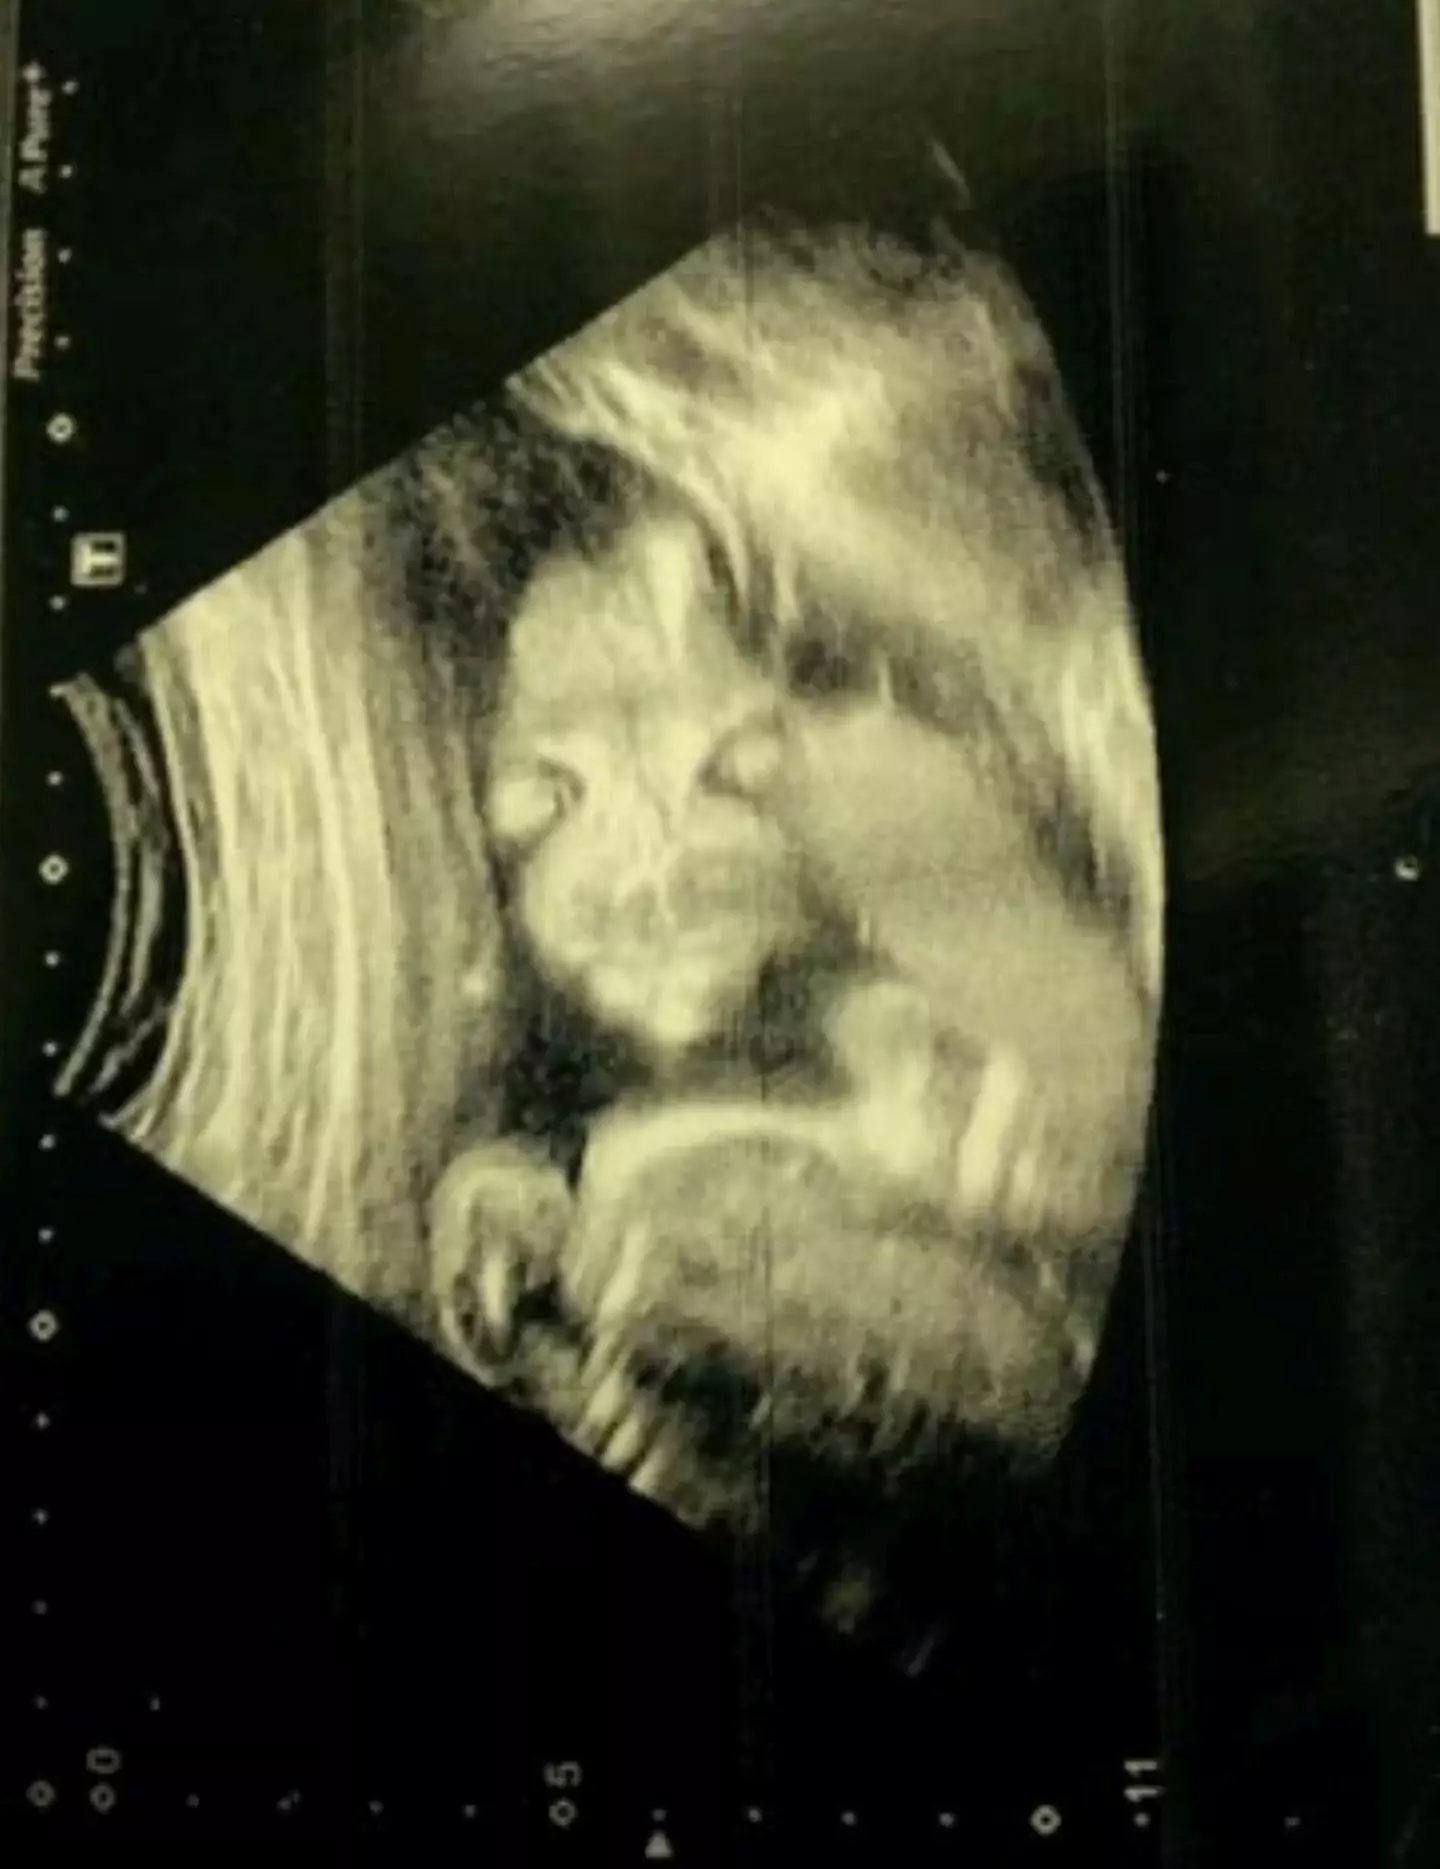 The expectant mother was shocked to see her baby's "demonic" appearance (